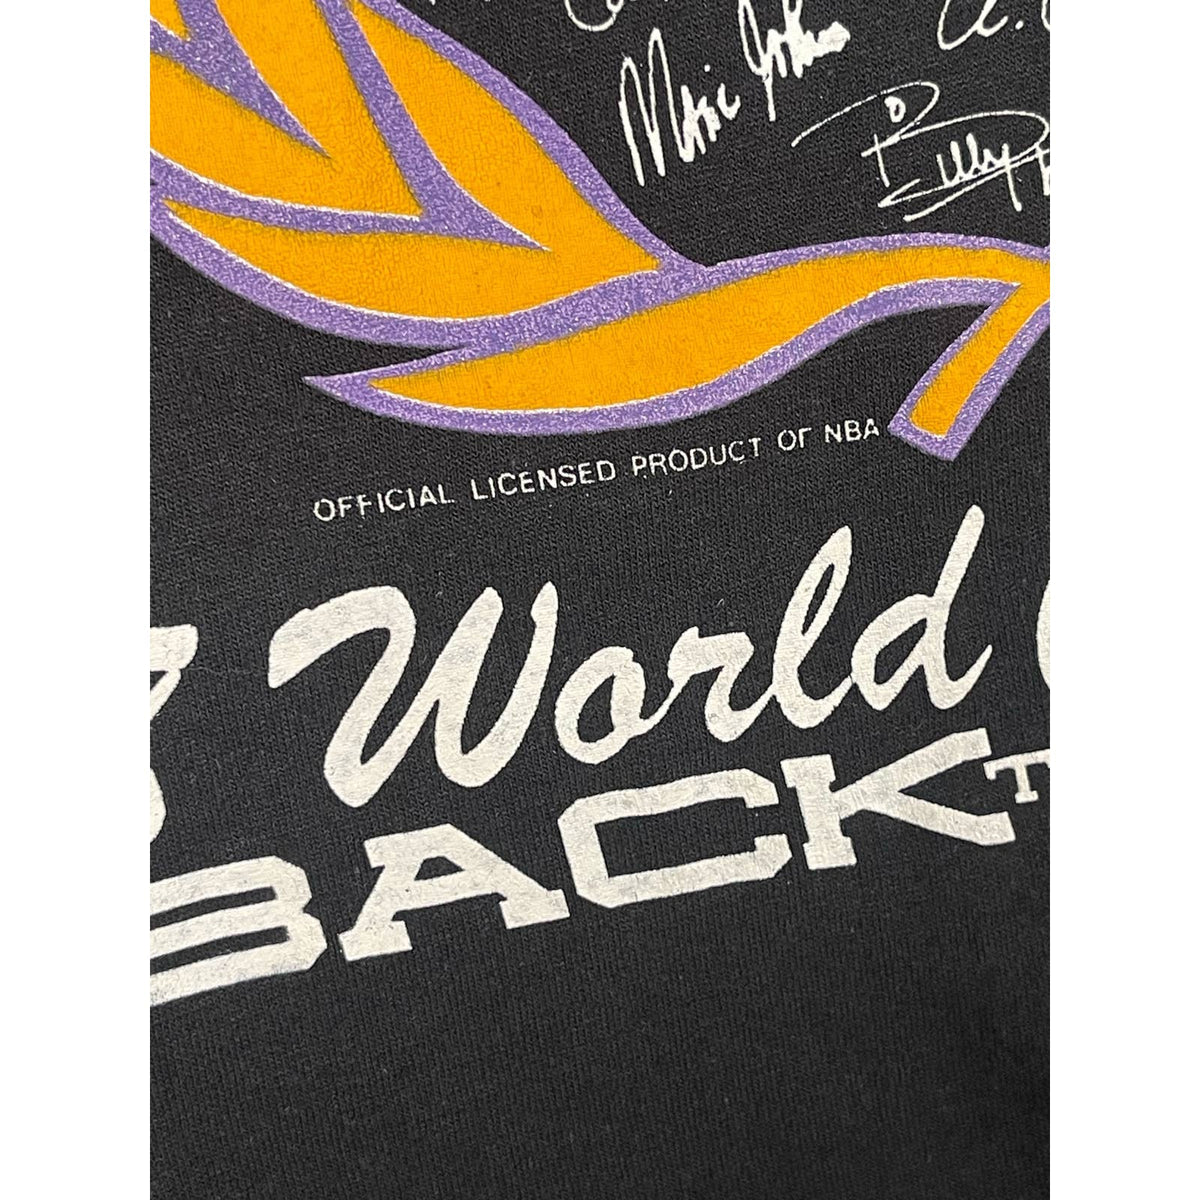 Vintage 1987 Los Angeles Lakers Back-to-Back Championship T-Shirt